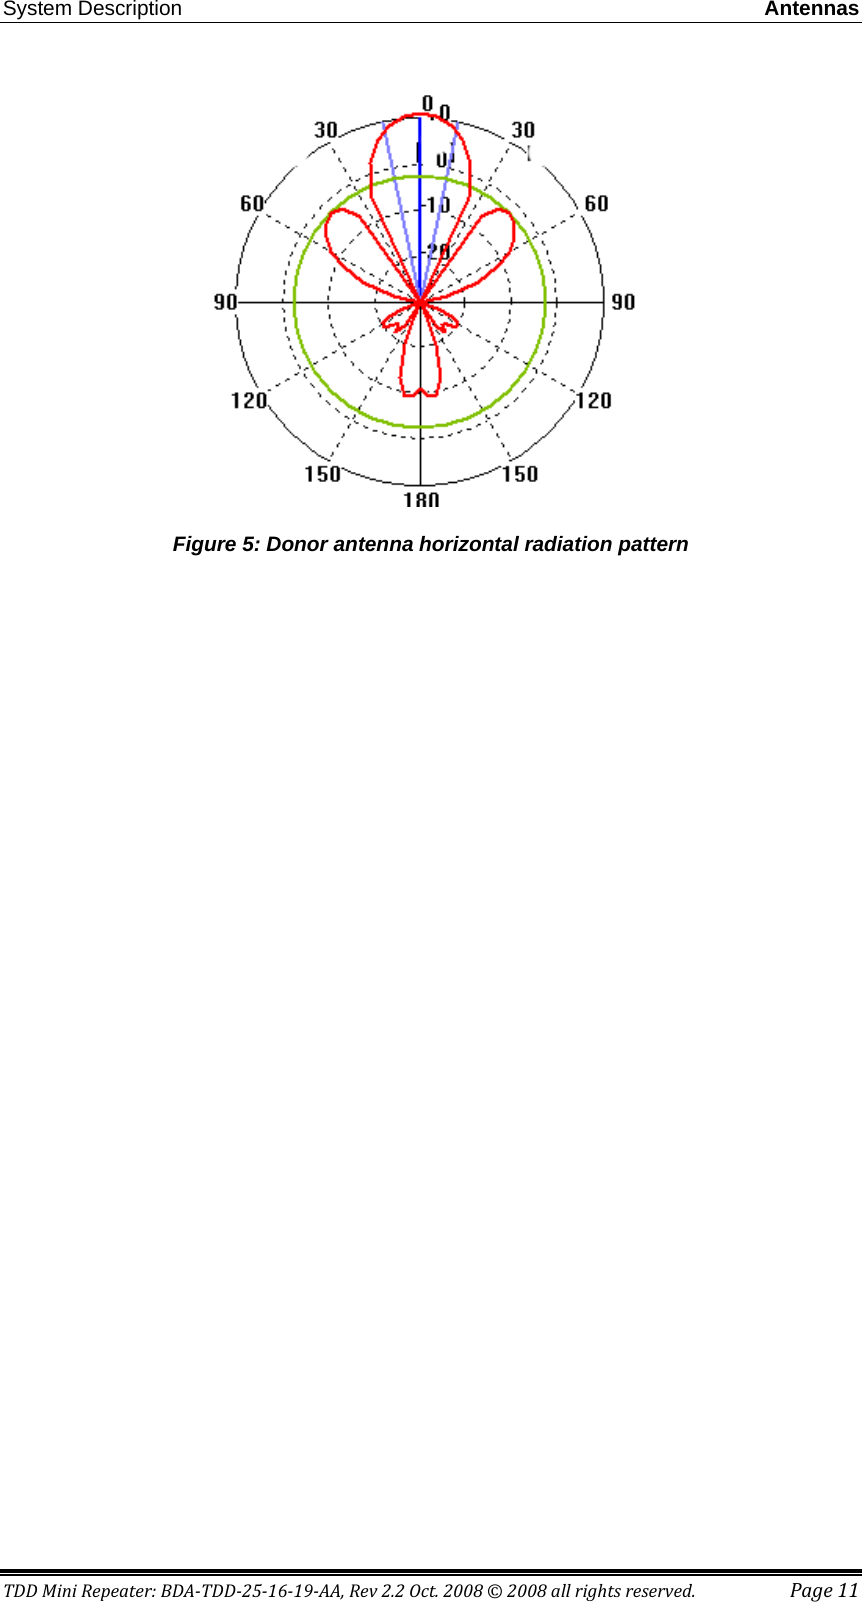 System Description Antennas TDD Mini Repeater: BDA-TDD-25-16-19-AA, Rev 2.2 Oct. 2008 © 2008 all rights reserved. Page 11  Figure 5: Donor antenna horizontal radiation pattern  